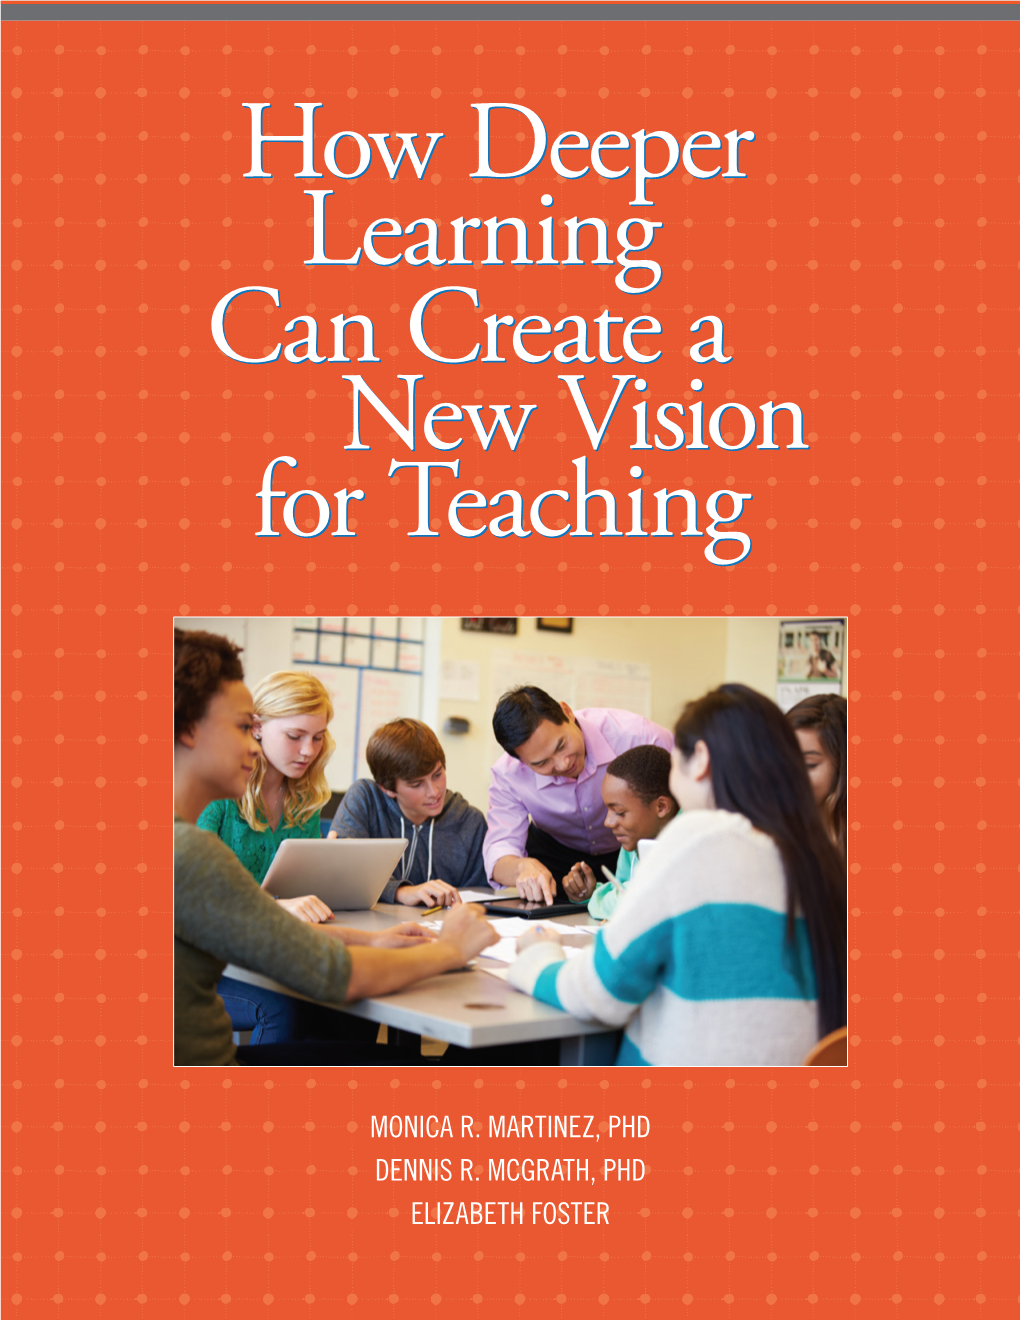 NCTAF-How-Deeper-Learning-Can-Create-A-New-Vision-For-Teaching.Pdf